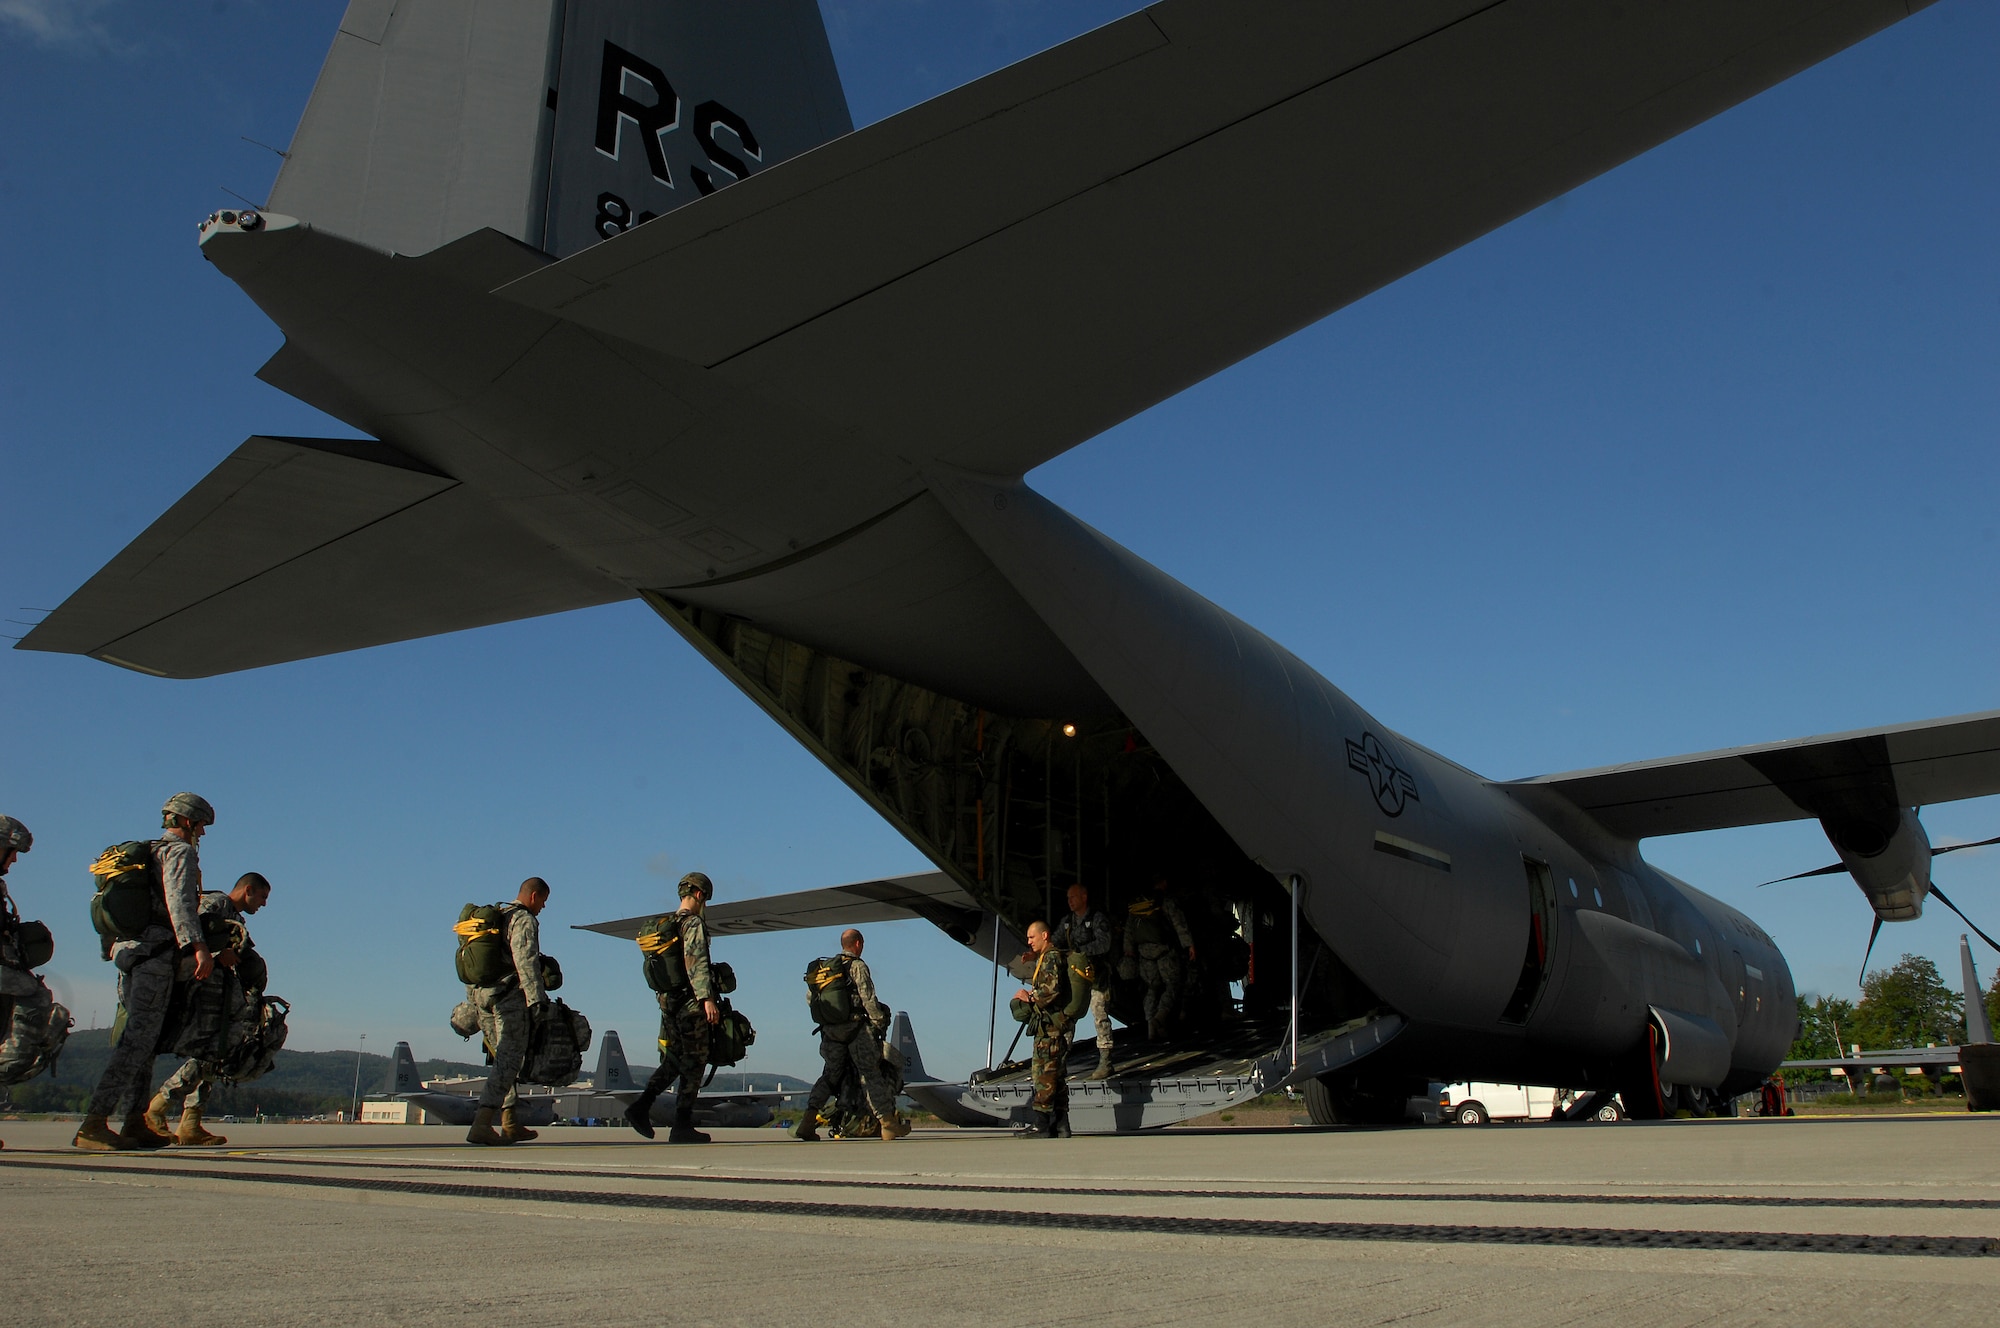 United States Air Force and Army paratroopers load Ramstein's new C-130J for the first Super Hercules personnel drop, May 4, 2009 Ramstein Air Base, Germany. (U.S. Air Force photo by Senior Airman Kenny Holston)
